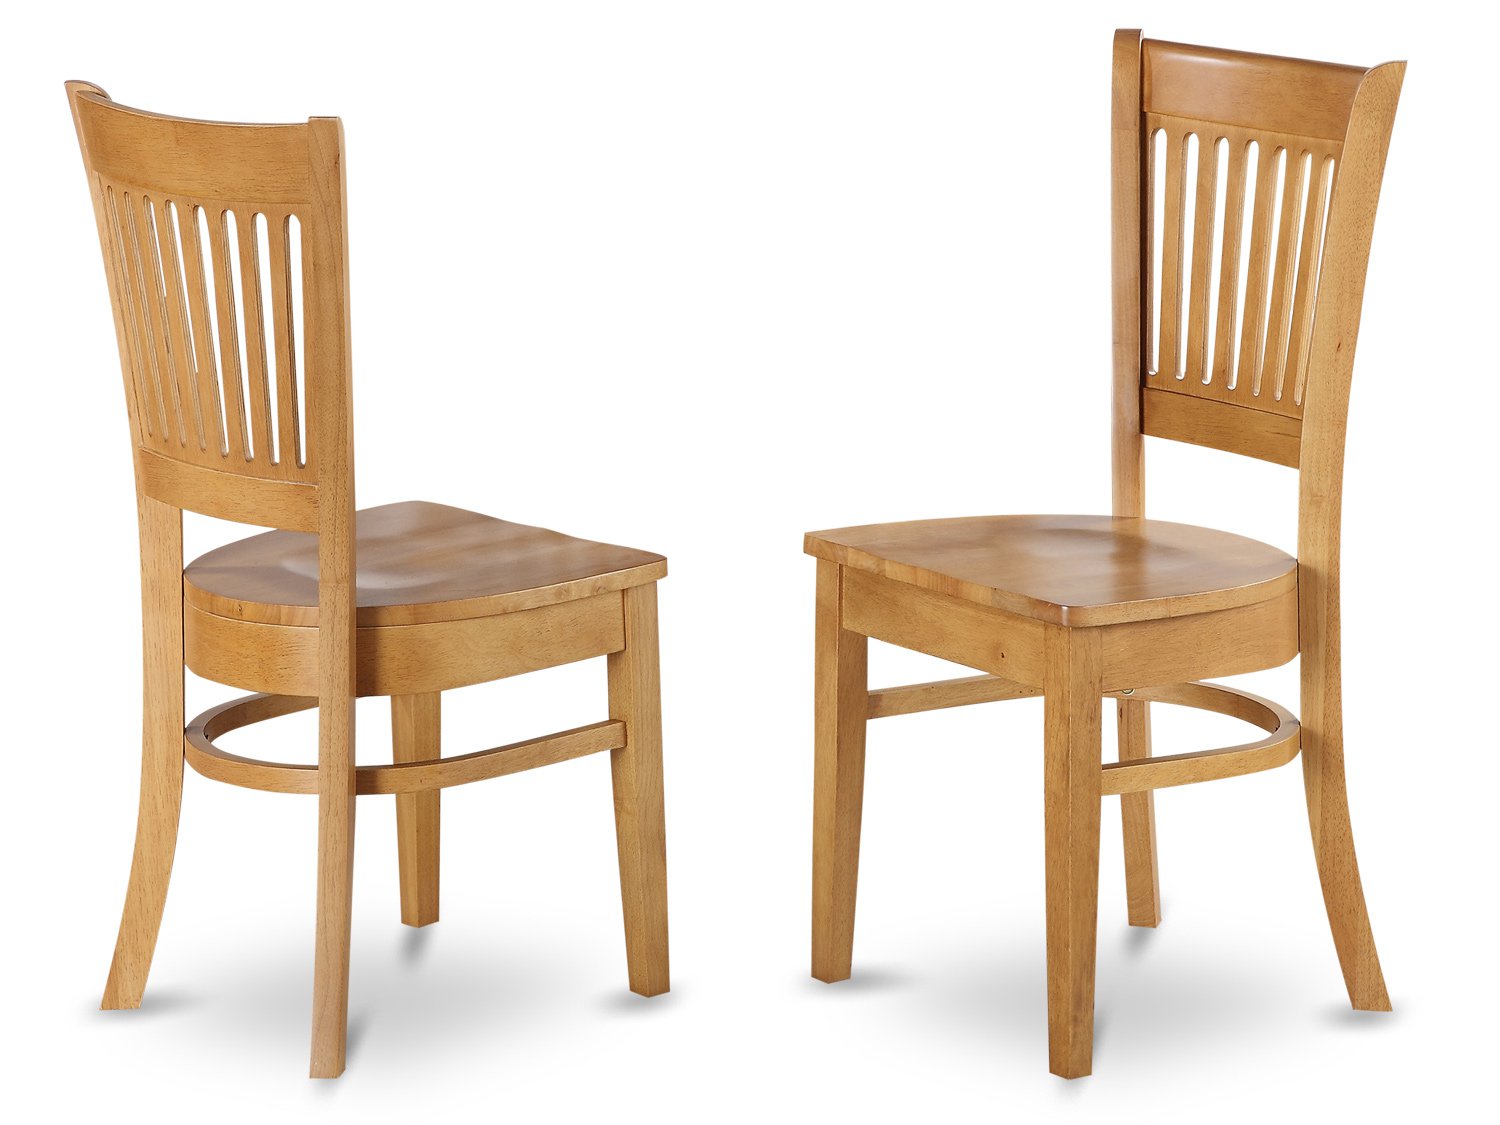 4 Chairs Oak Dining Room Set